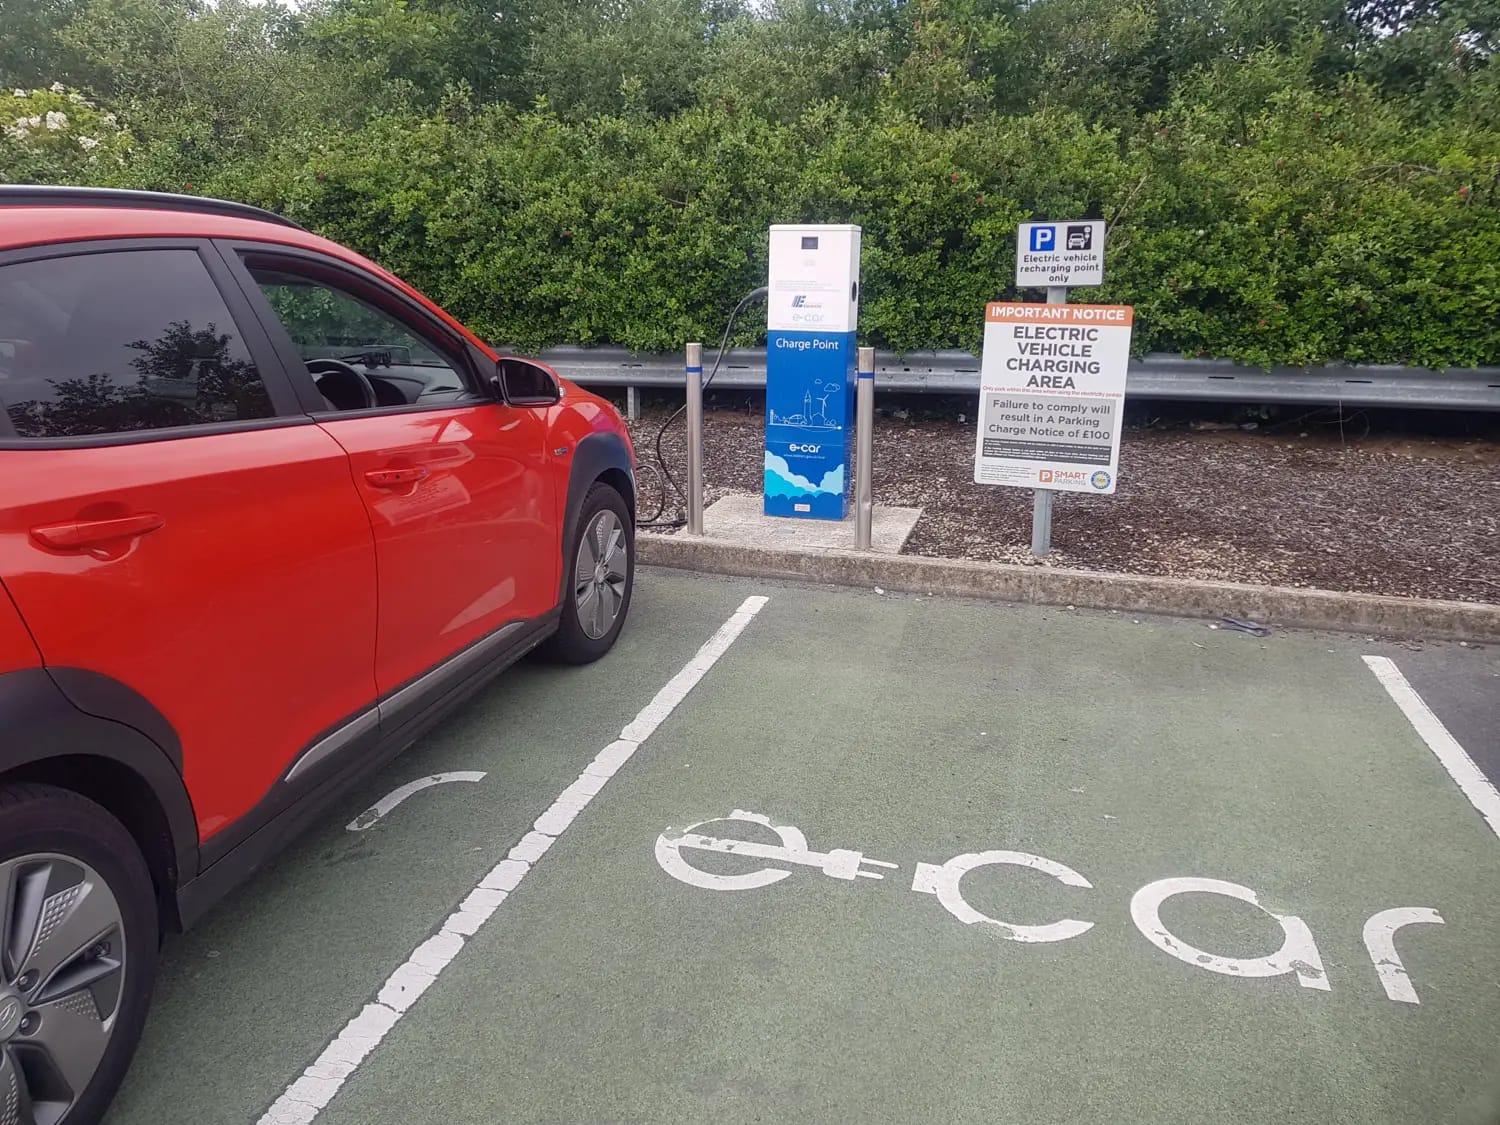 electric-vehicle-parking-fines-to-be-implemented-in-the-uk-electric